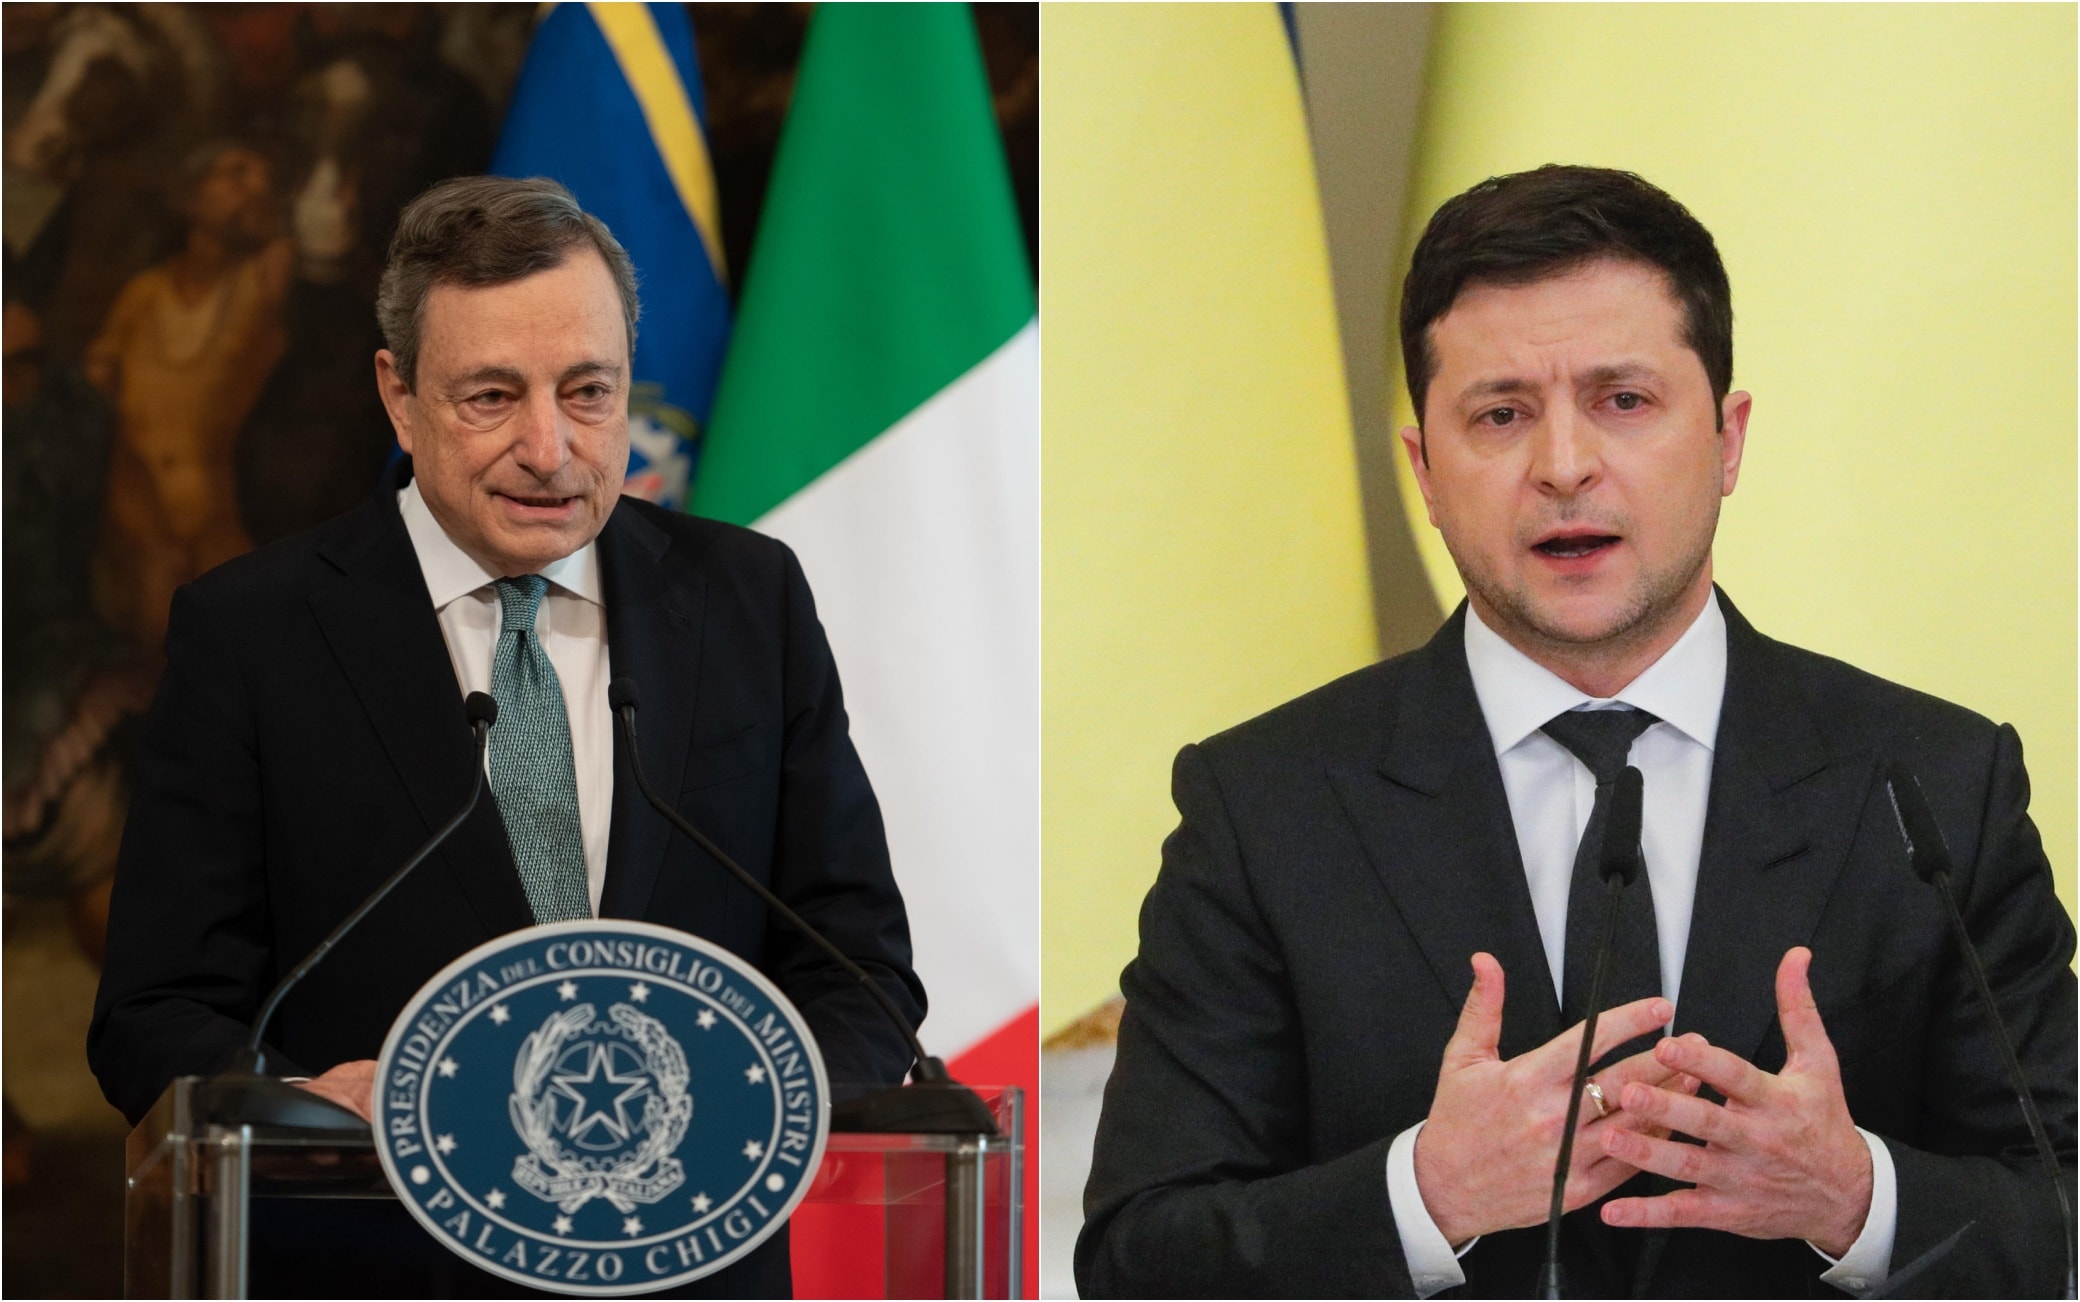 War in Ukraine, Draghi-Zelensky phone call: “Italy supports sanctions against Russia”